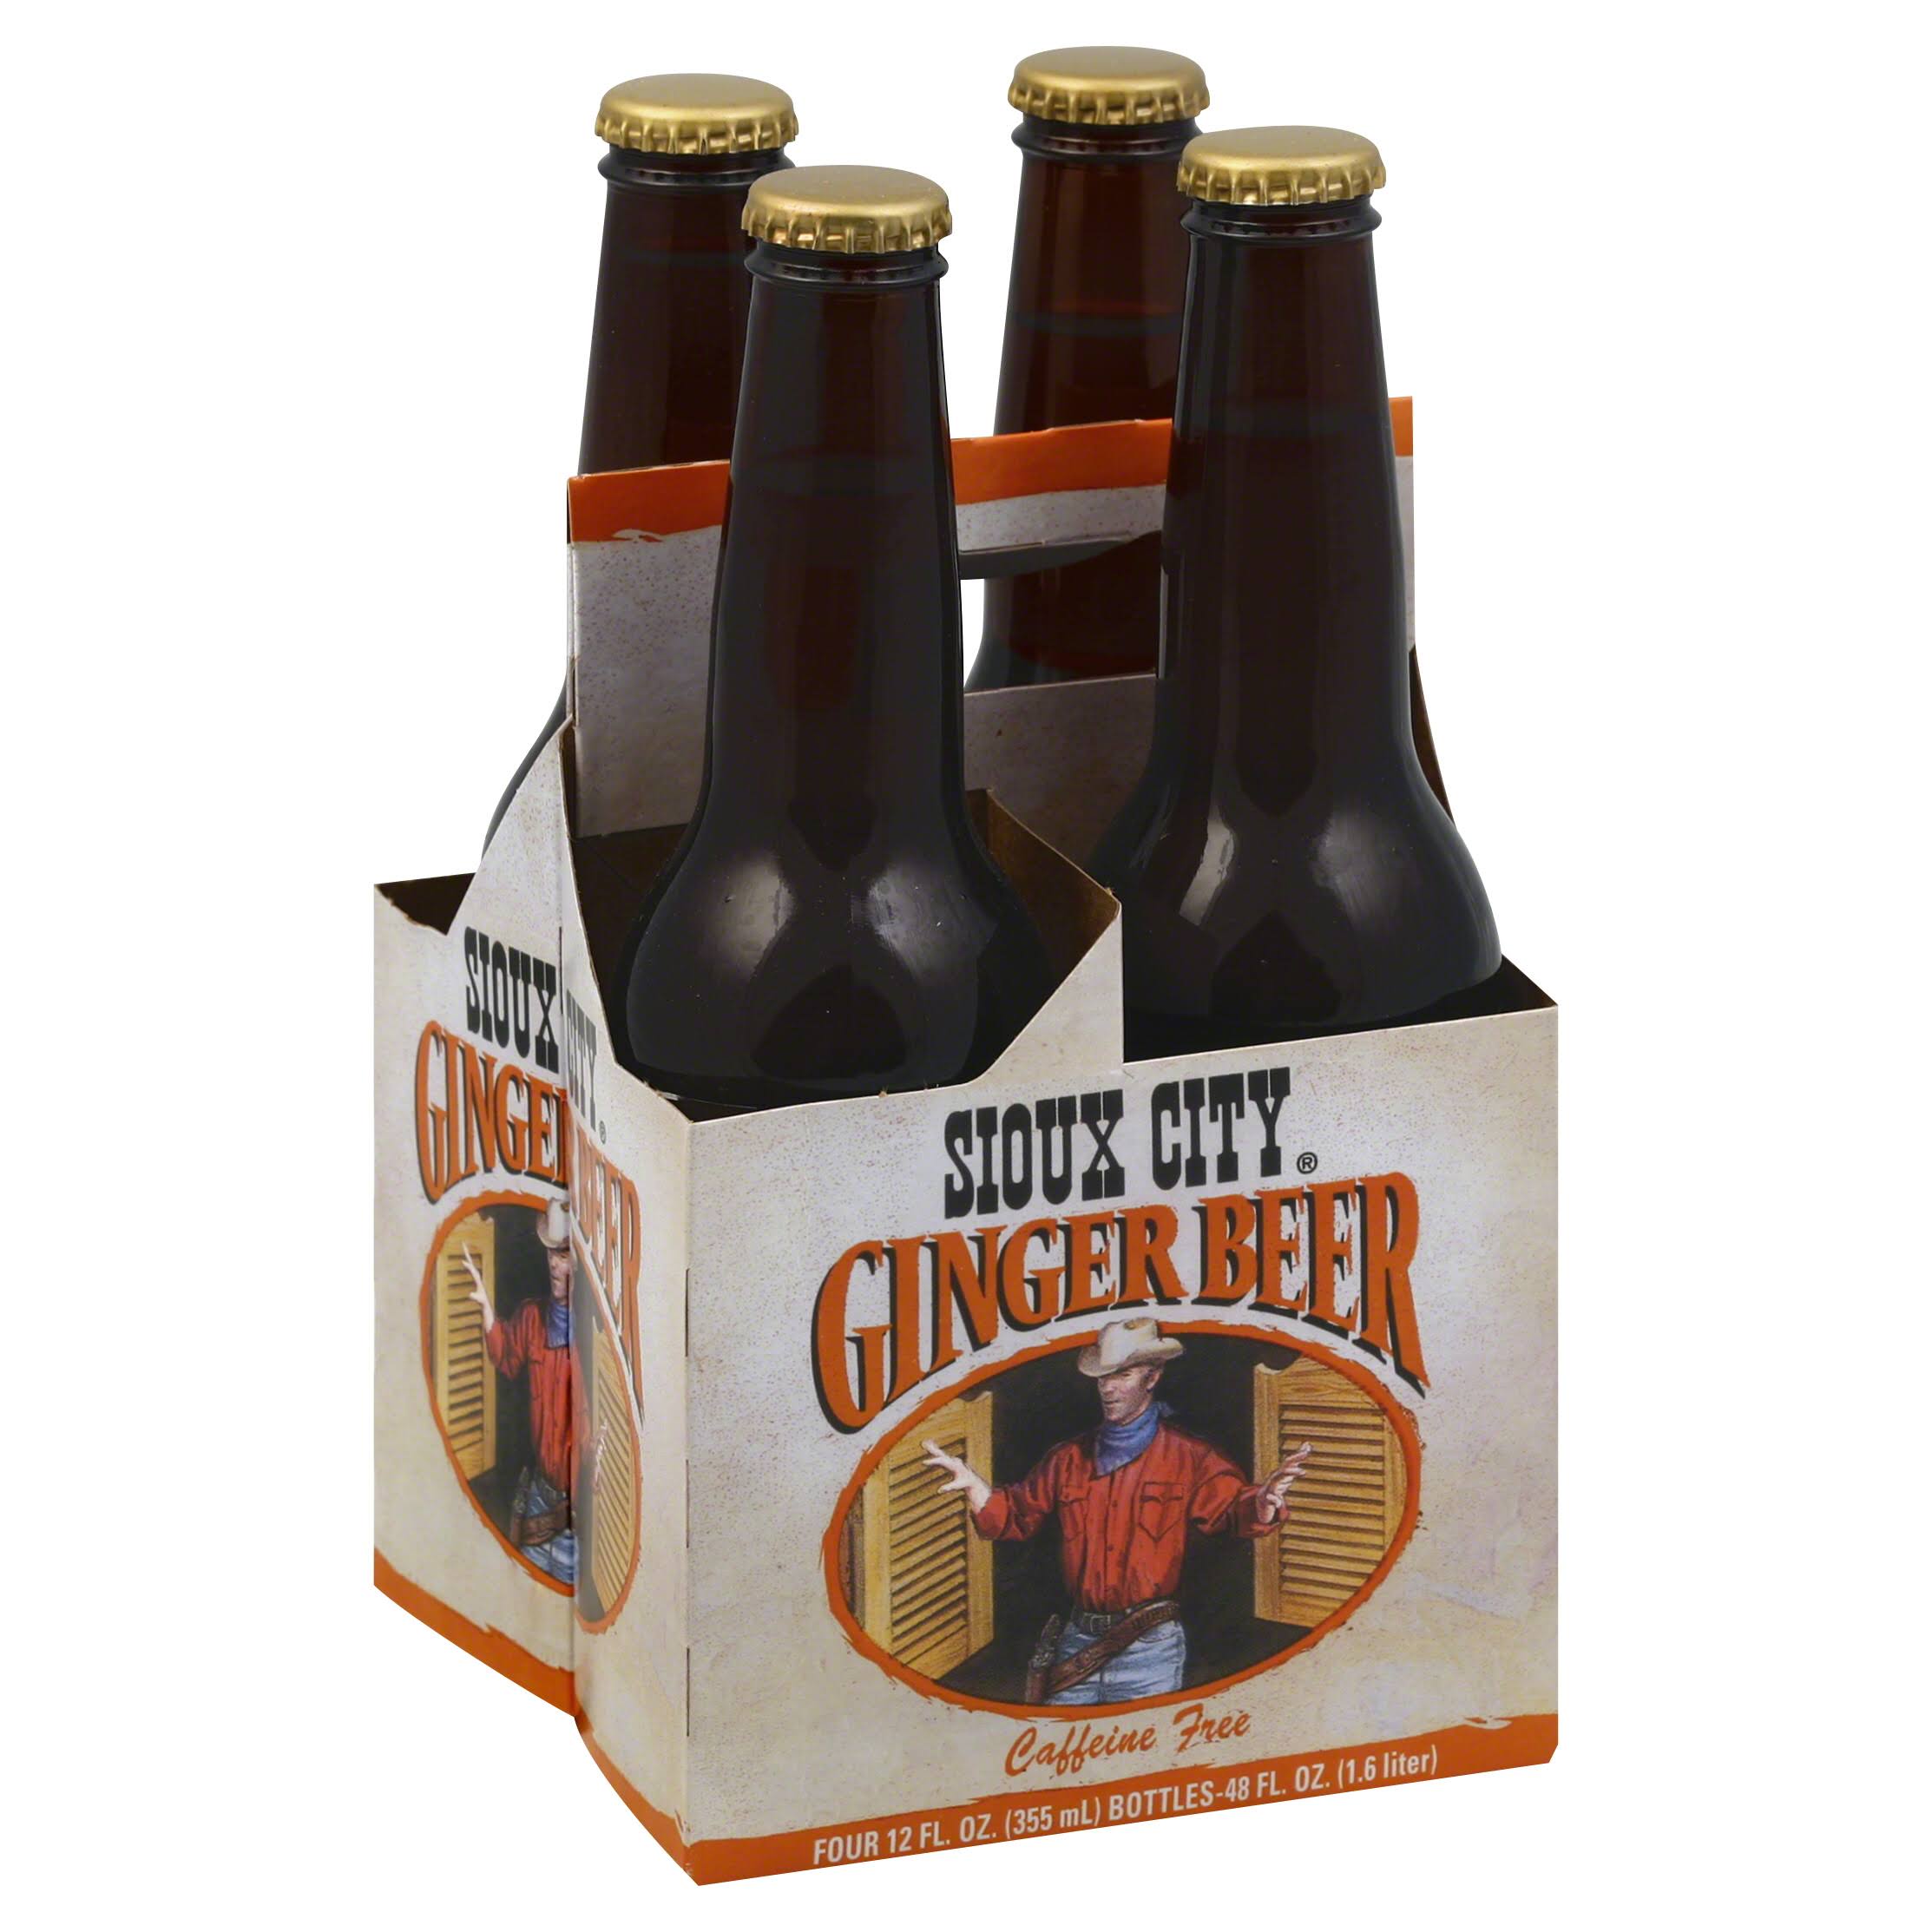 Sioux City Ginger Beer - 12oz